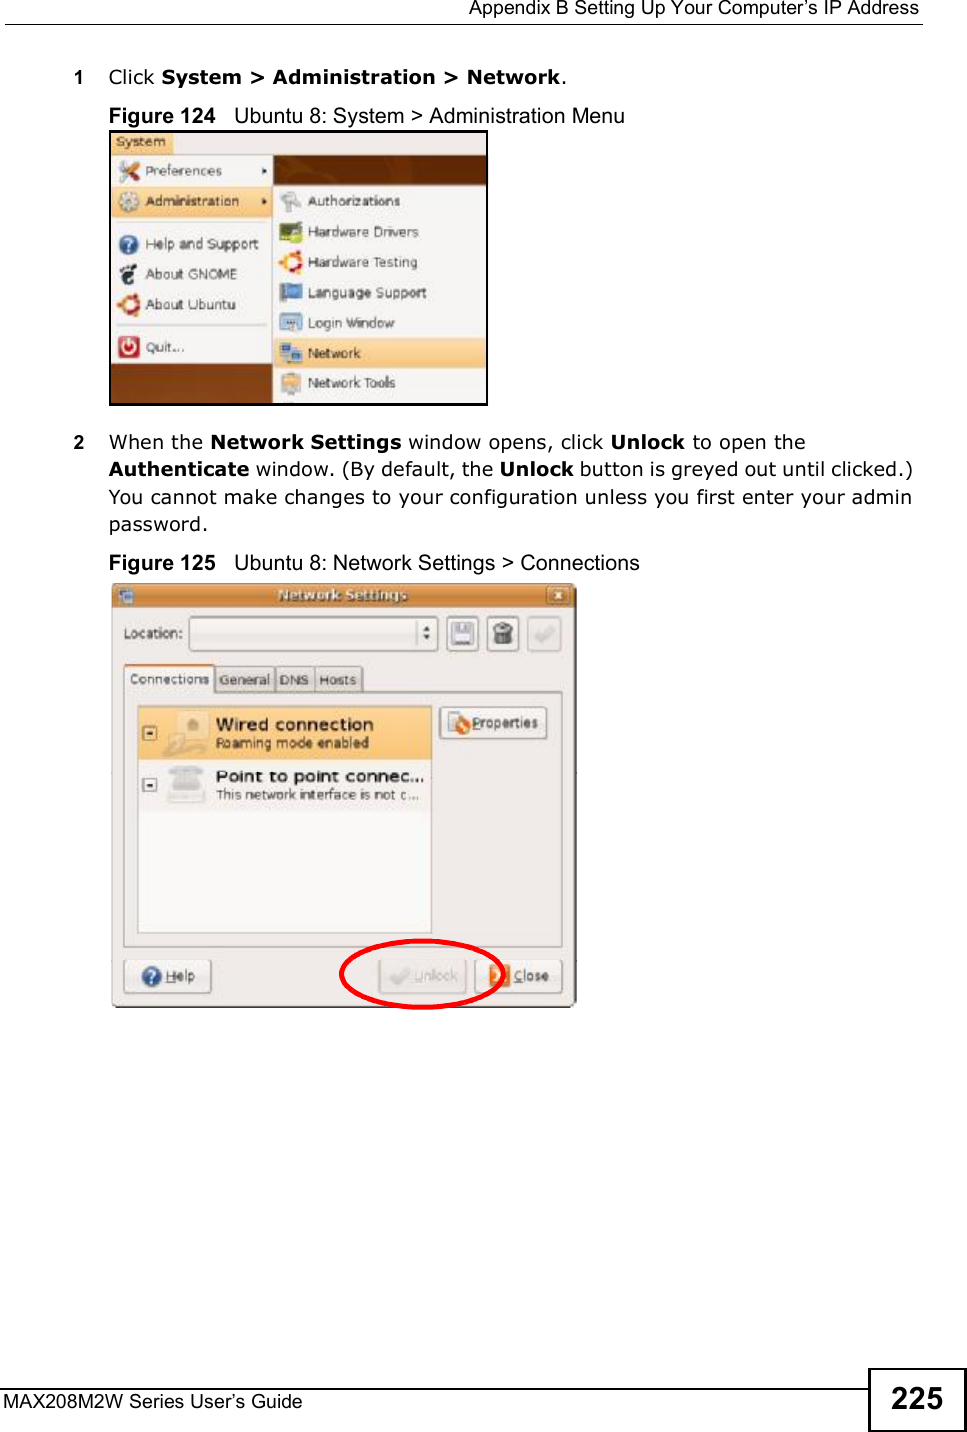  Appendix BSetting Up Your Computer s IP AddressMAX208M2W Series User s Guide 2251Click System &gt; Administration &gt; Network.Figure 124   Ubuntu 8: System &gt; Administration Menu2When the Network Settings window opens, click Unlock to open the Authenticate window. (By default, the Unlock button is greyed out until clicked.) You cannot make changes to your configuration unless you first enter your admin password.Figure 125   Ubuntu 8: Network Settings &gt; Connections